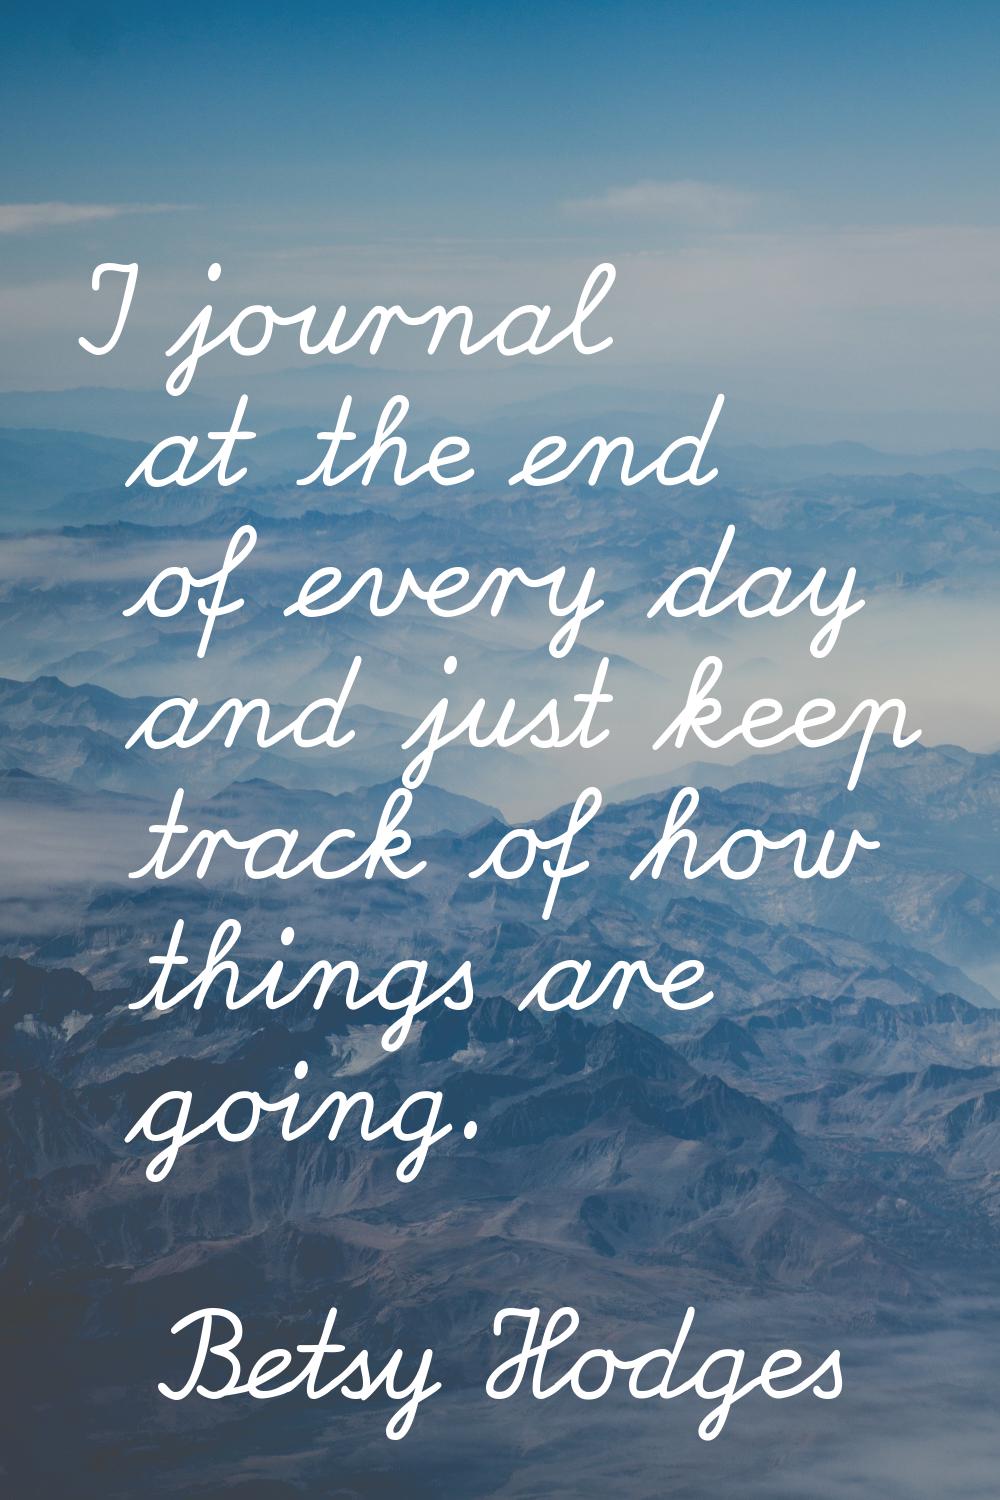 I journal at the end of every day and just keep track of how things are going.